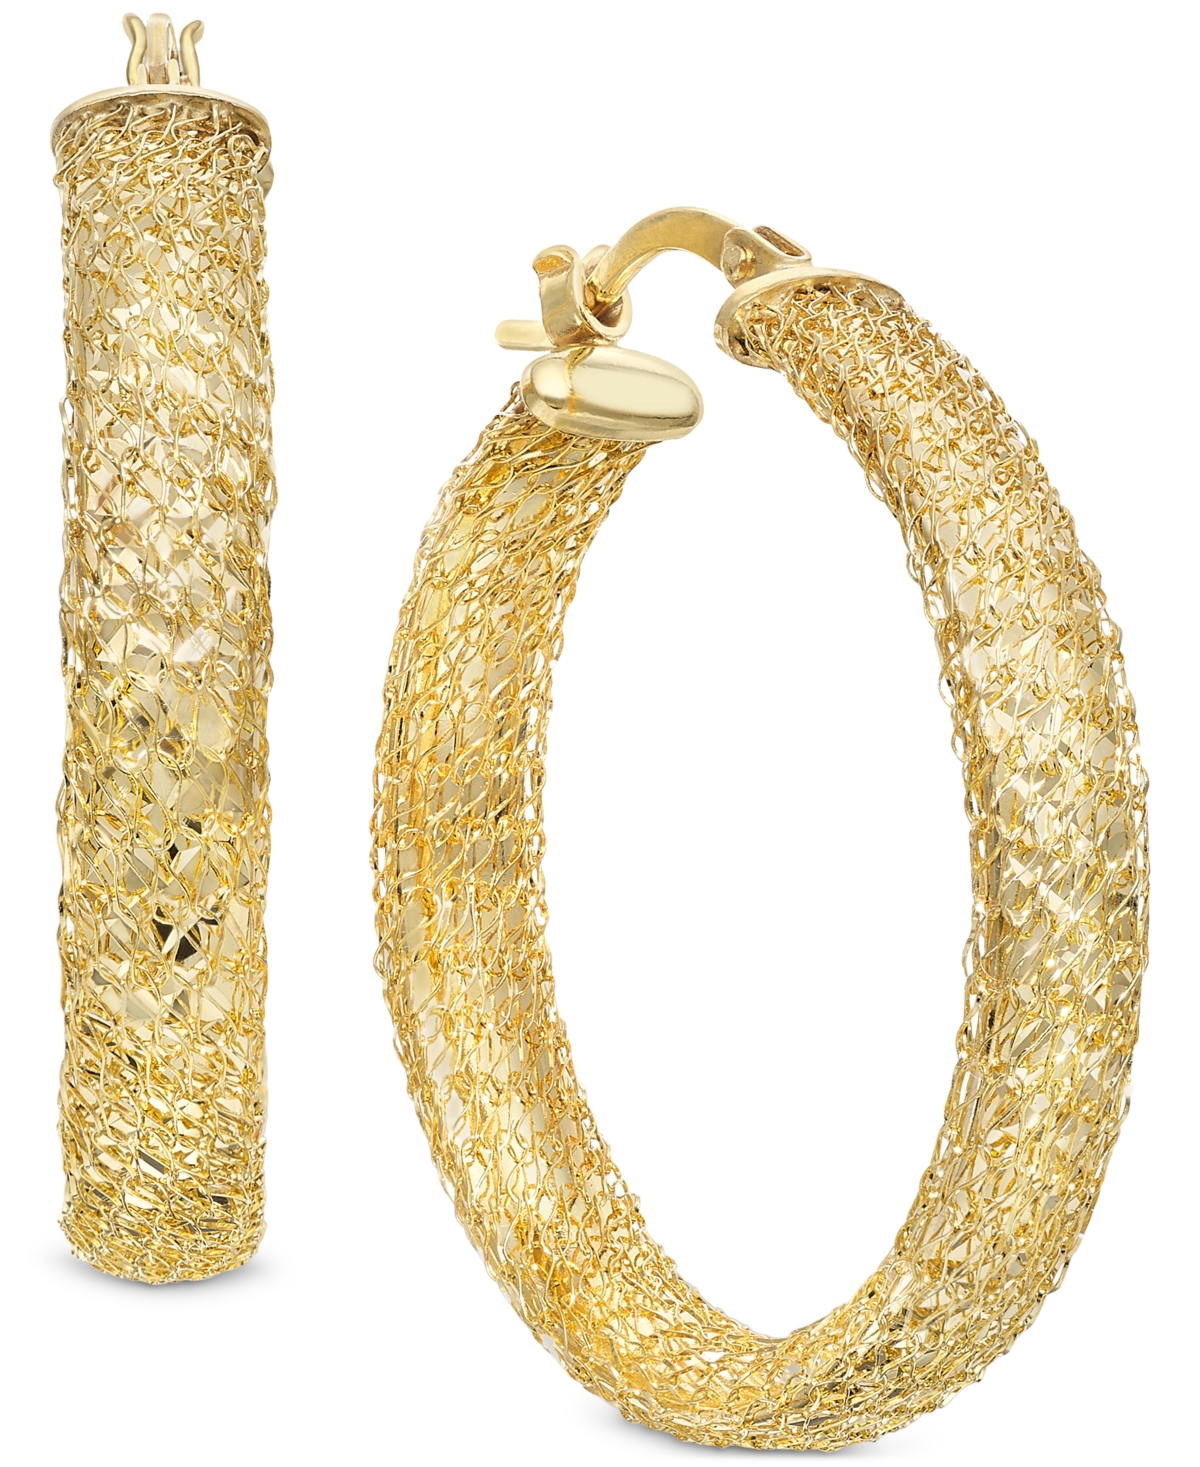 Textured Weave Small Hoop Earrings in 10k Gold, 25mm - Gold